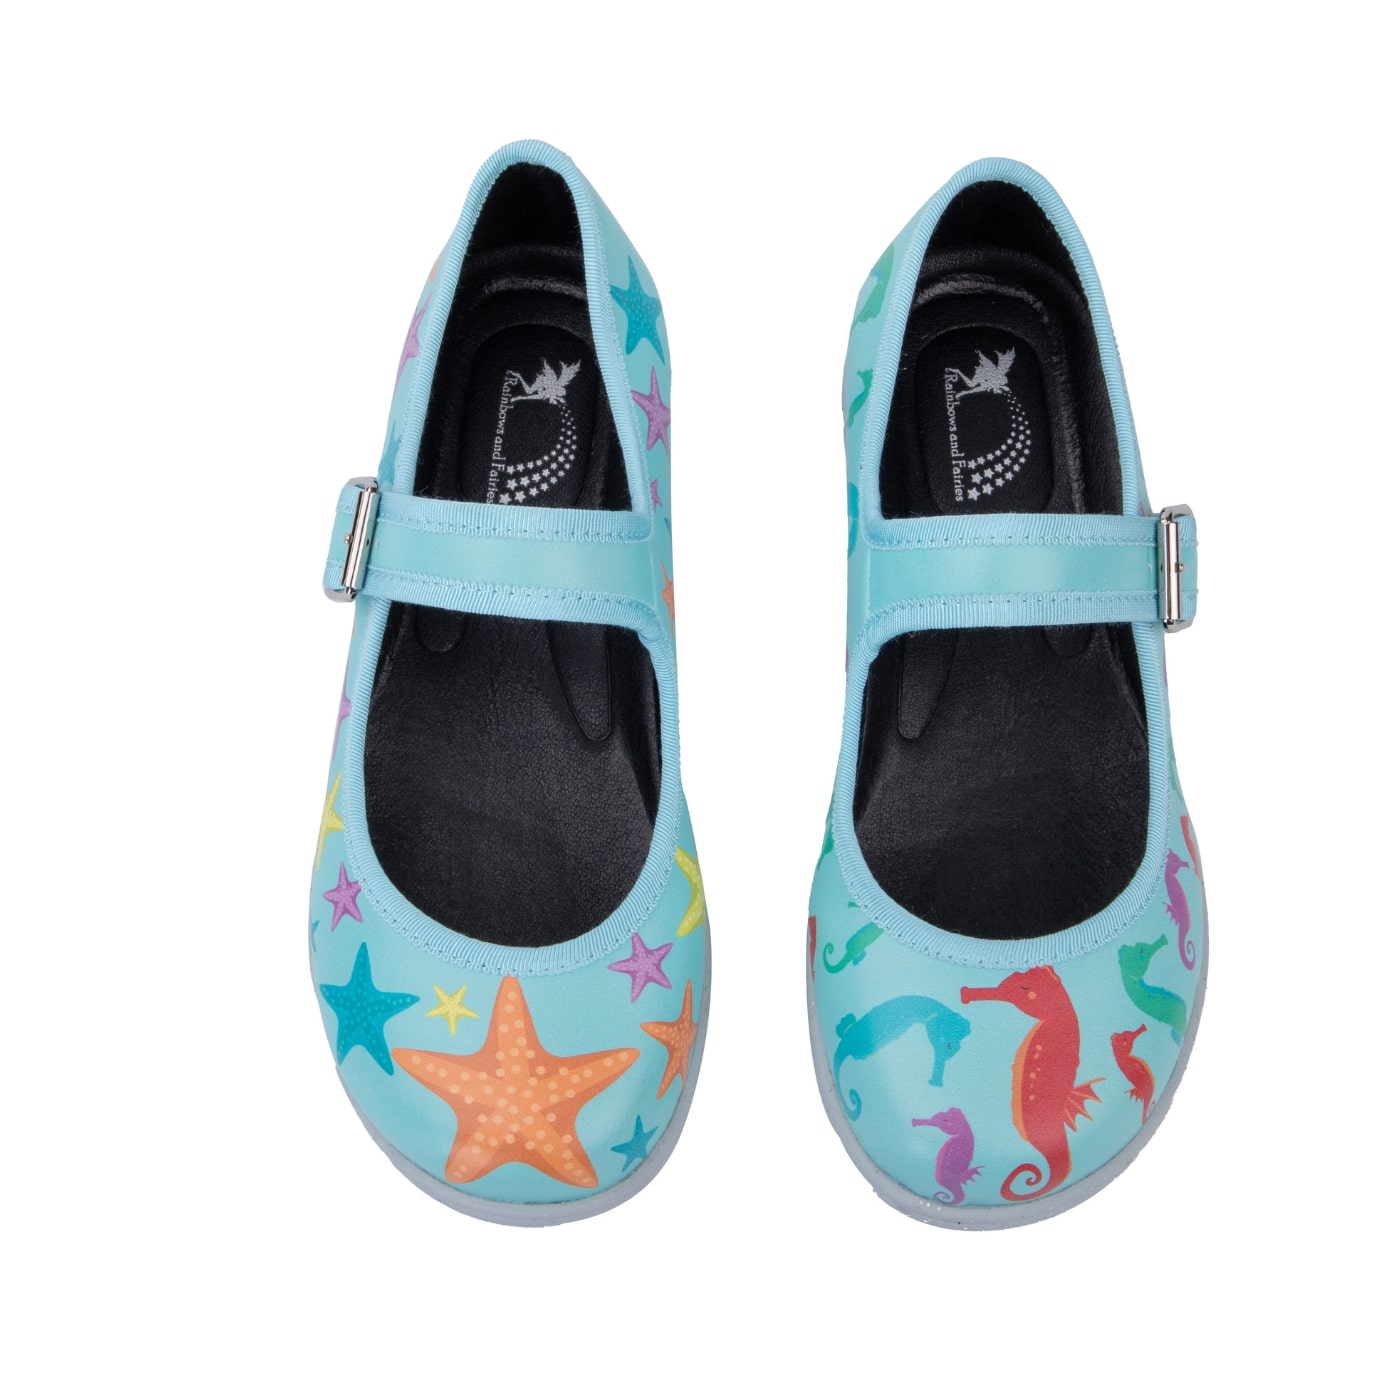 Oceania Mary Janes by RainbowsAndFairies.com.au (Seahorse - Starfish - Mismatched Shoes - Glitter Shoes  - Under The Sea) - SKU: FW_MARYJ_OCEAN_ORG - Pic-02